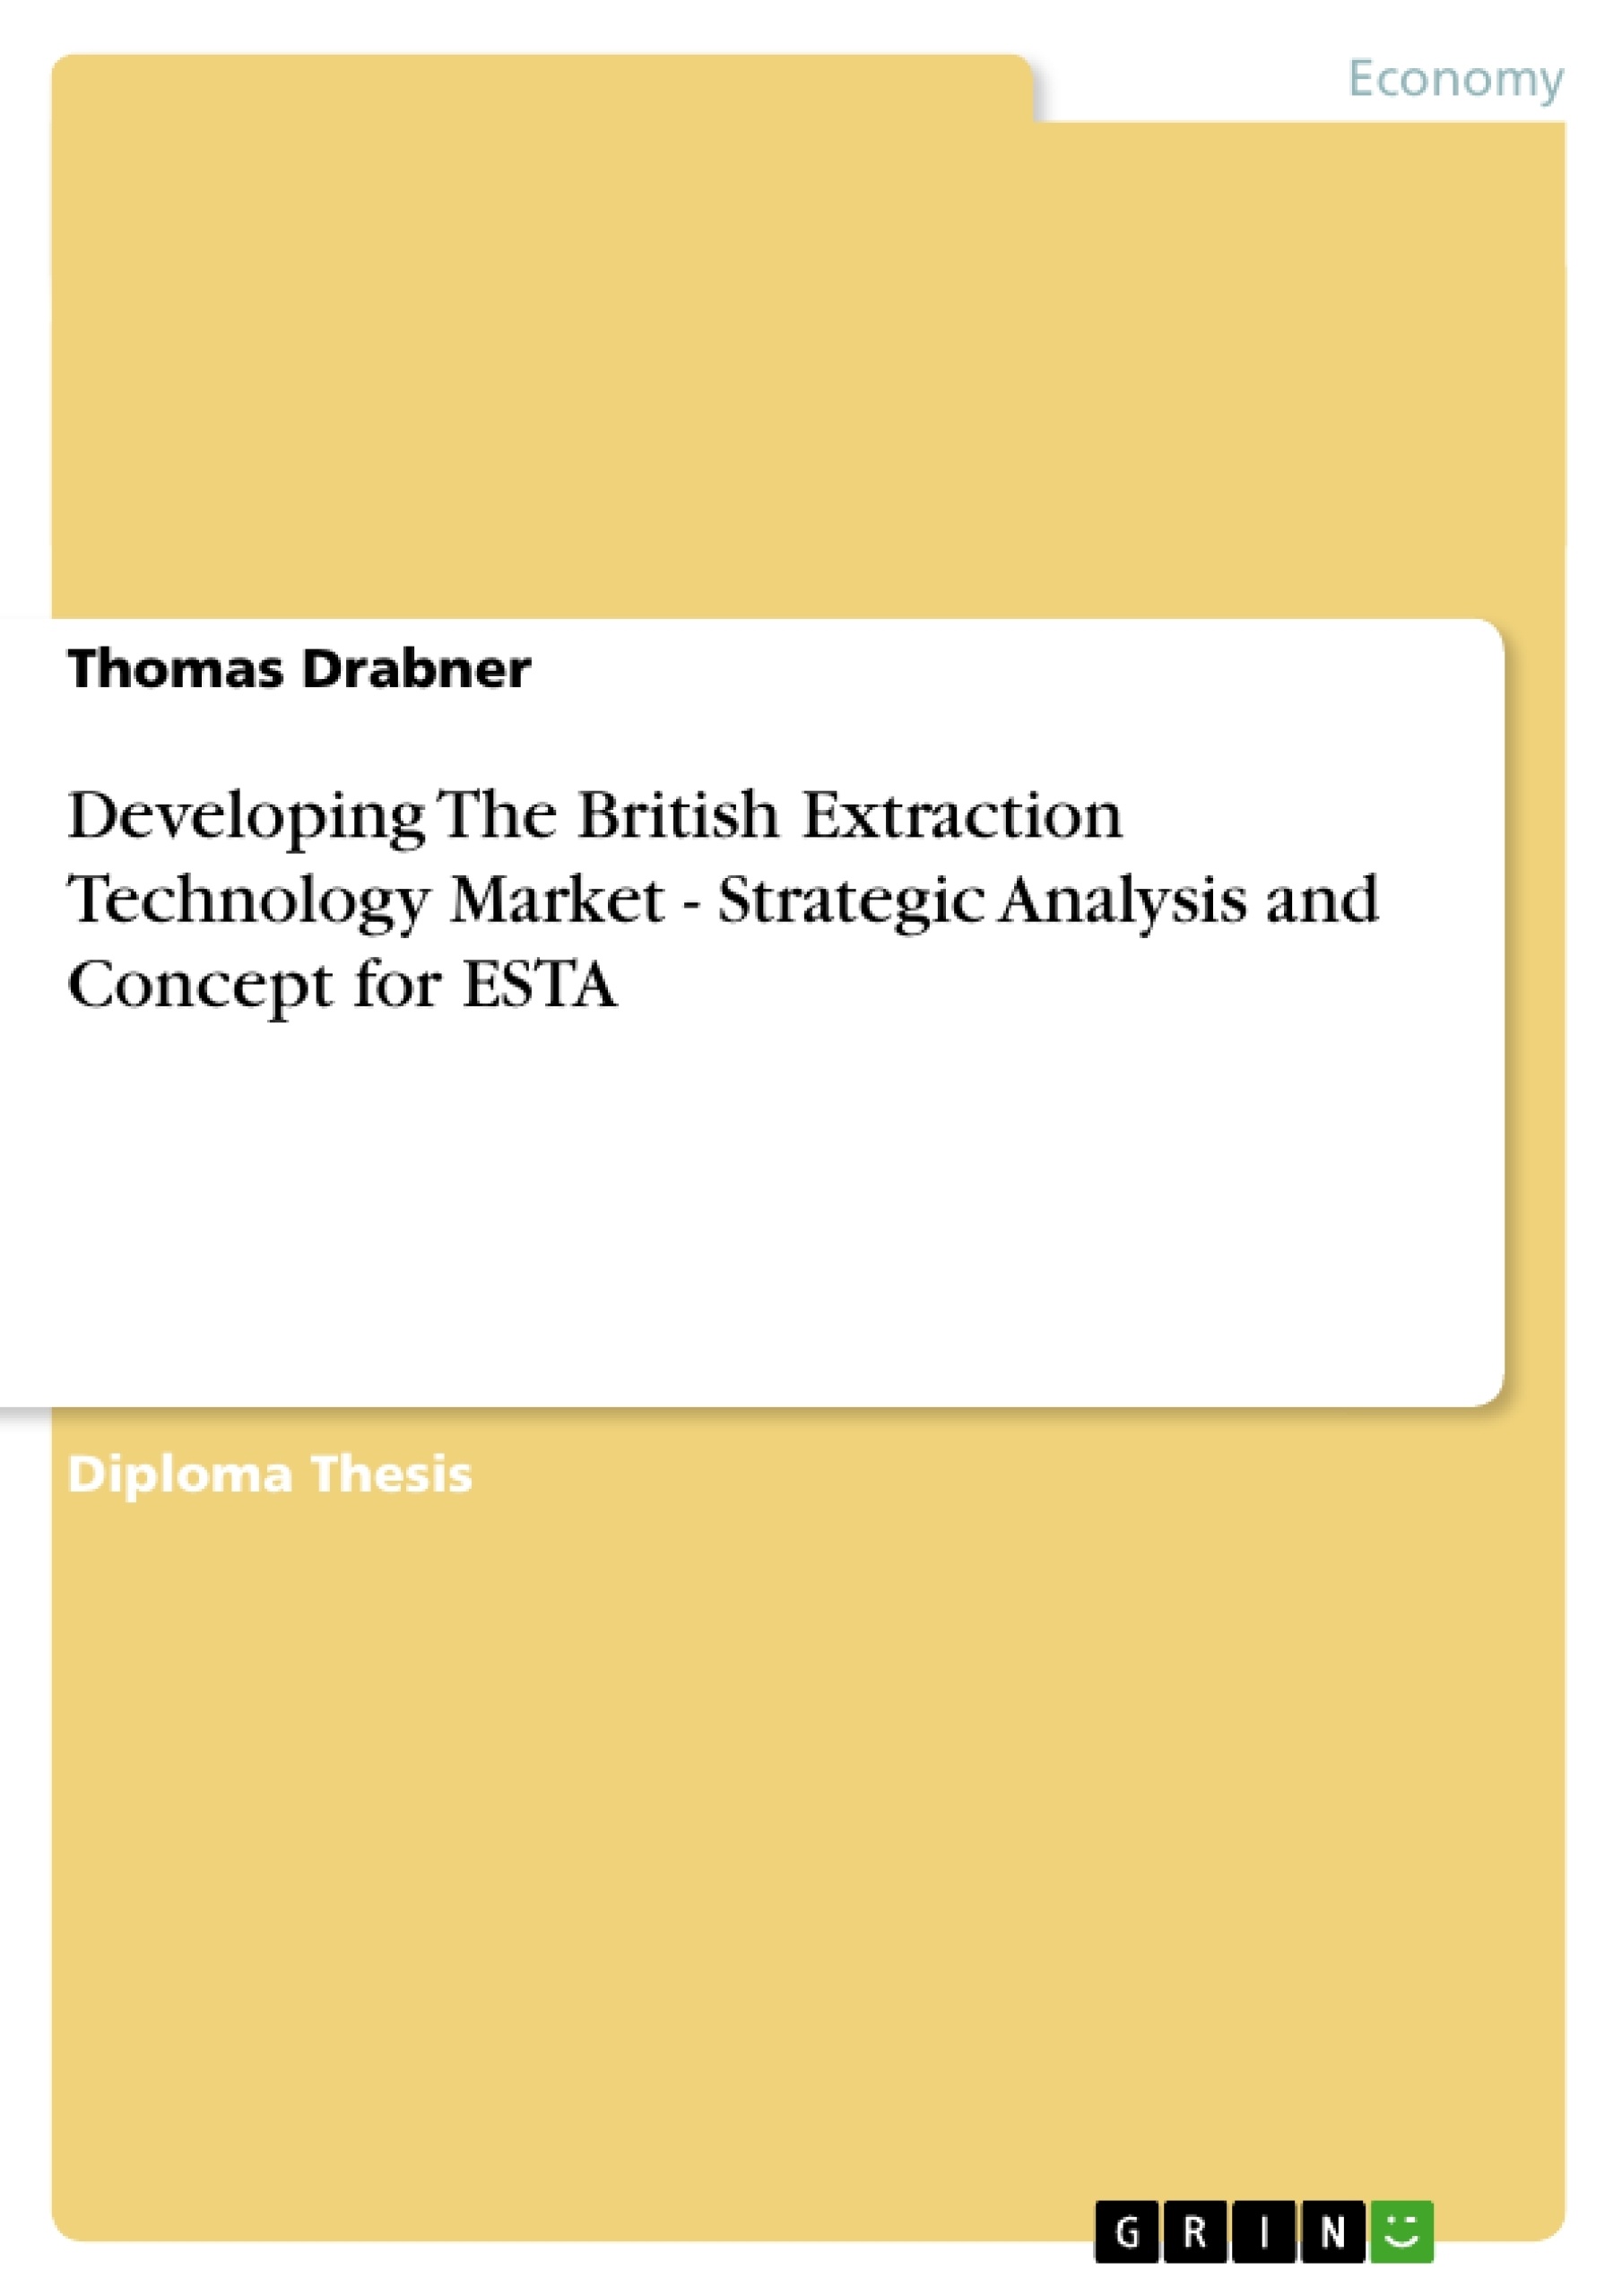 Titre: Developing The British Extraction Technology Market - Strategic Analysis and Concept for ESTA